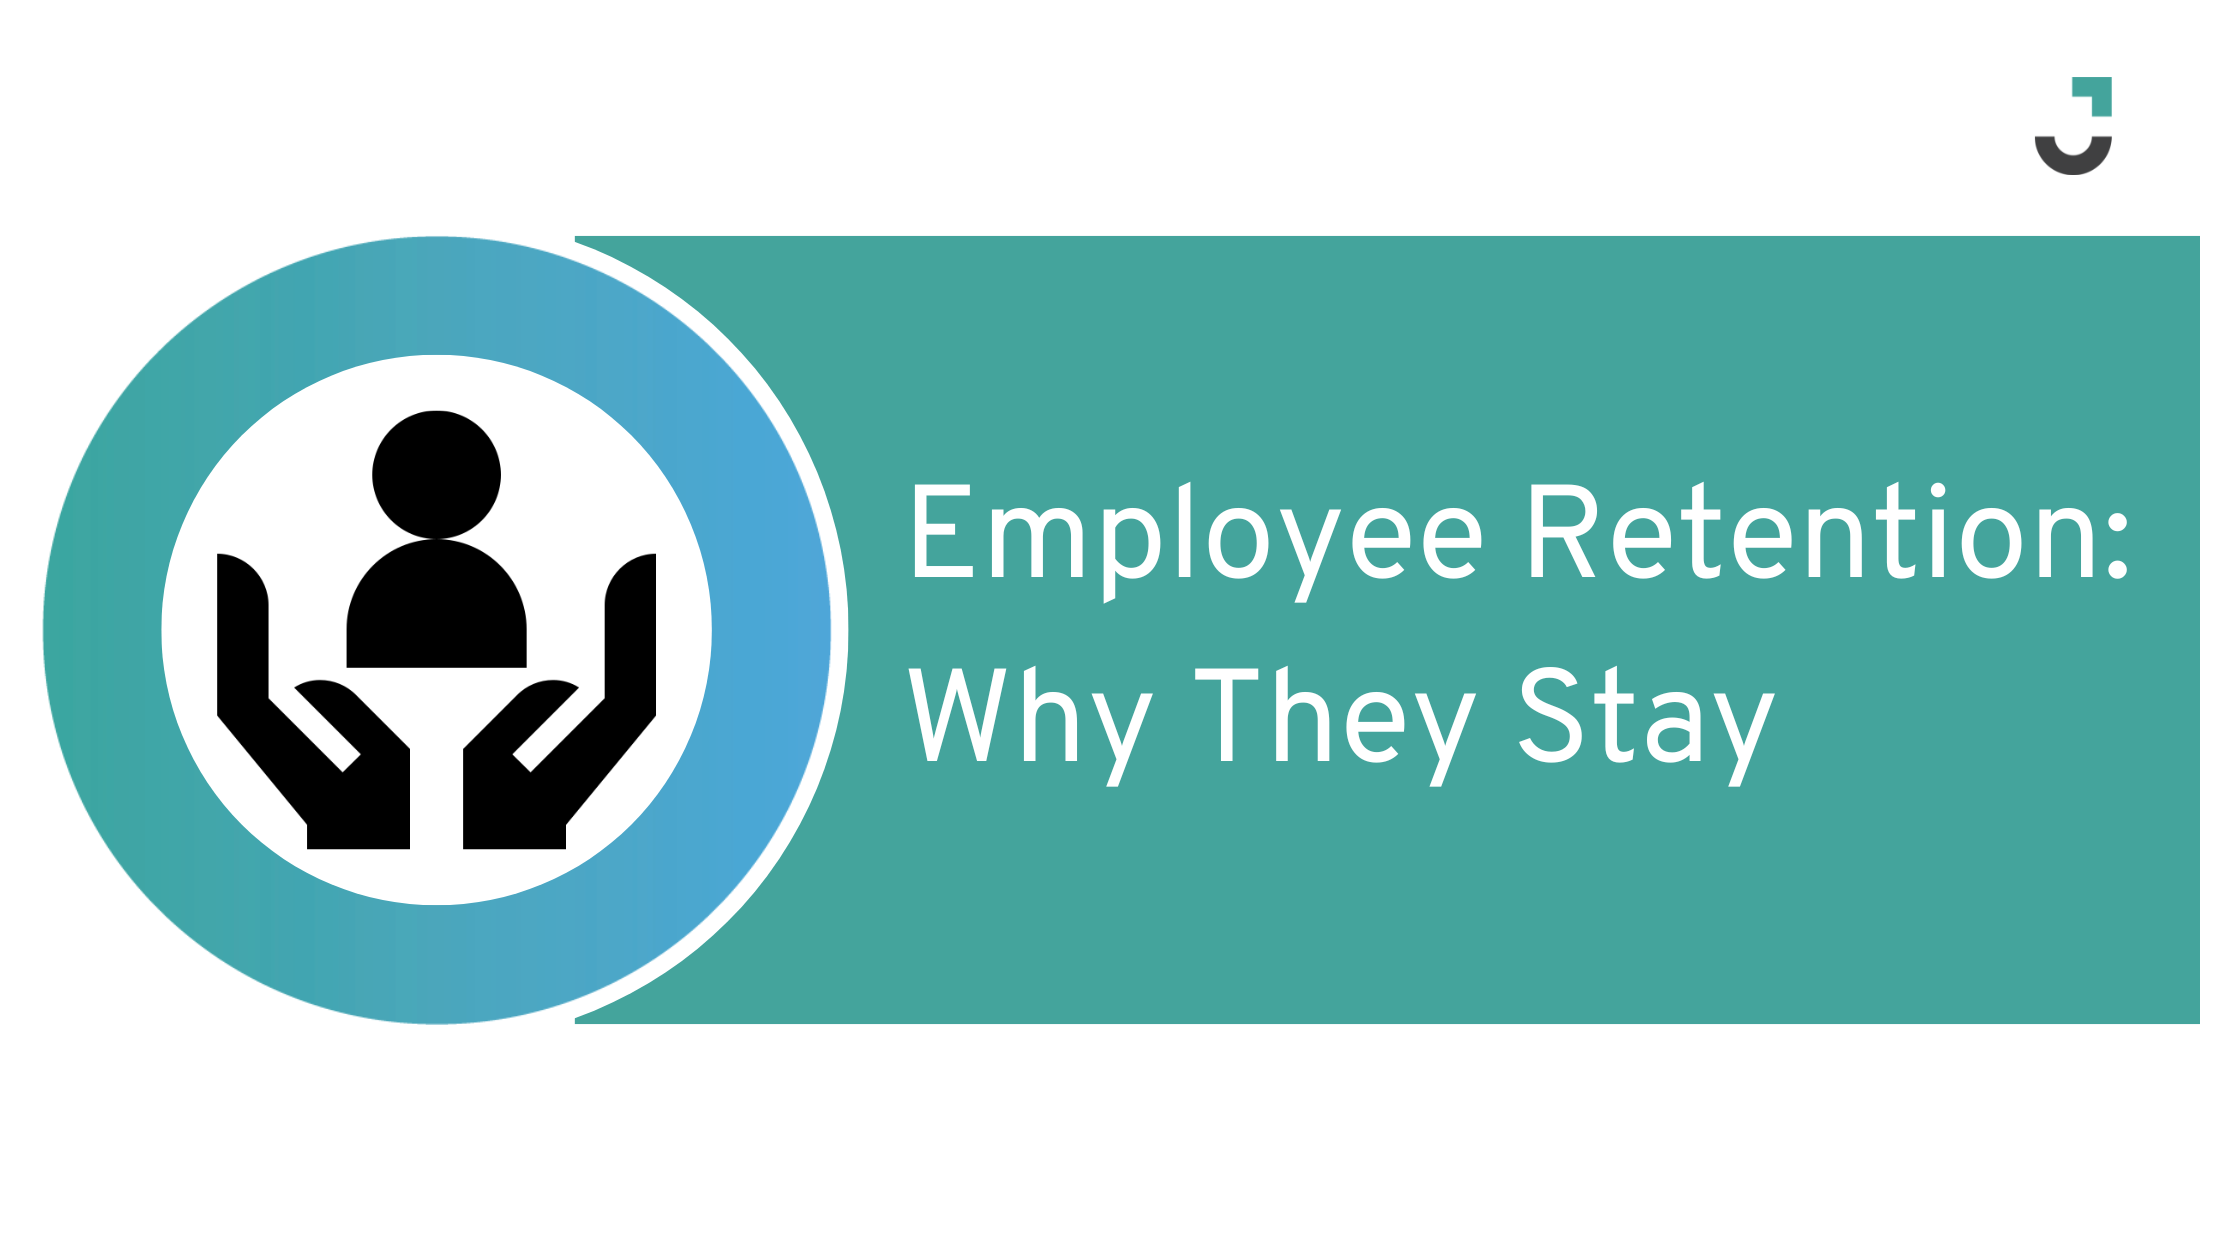 Employee Retention: Why They Stay